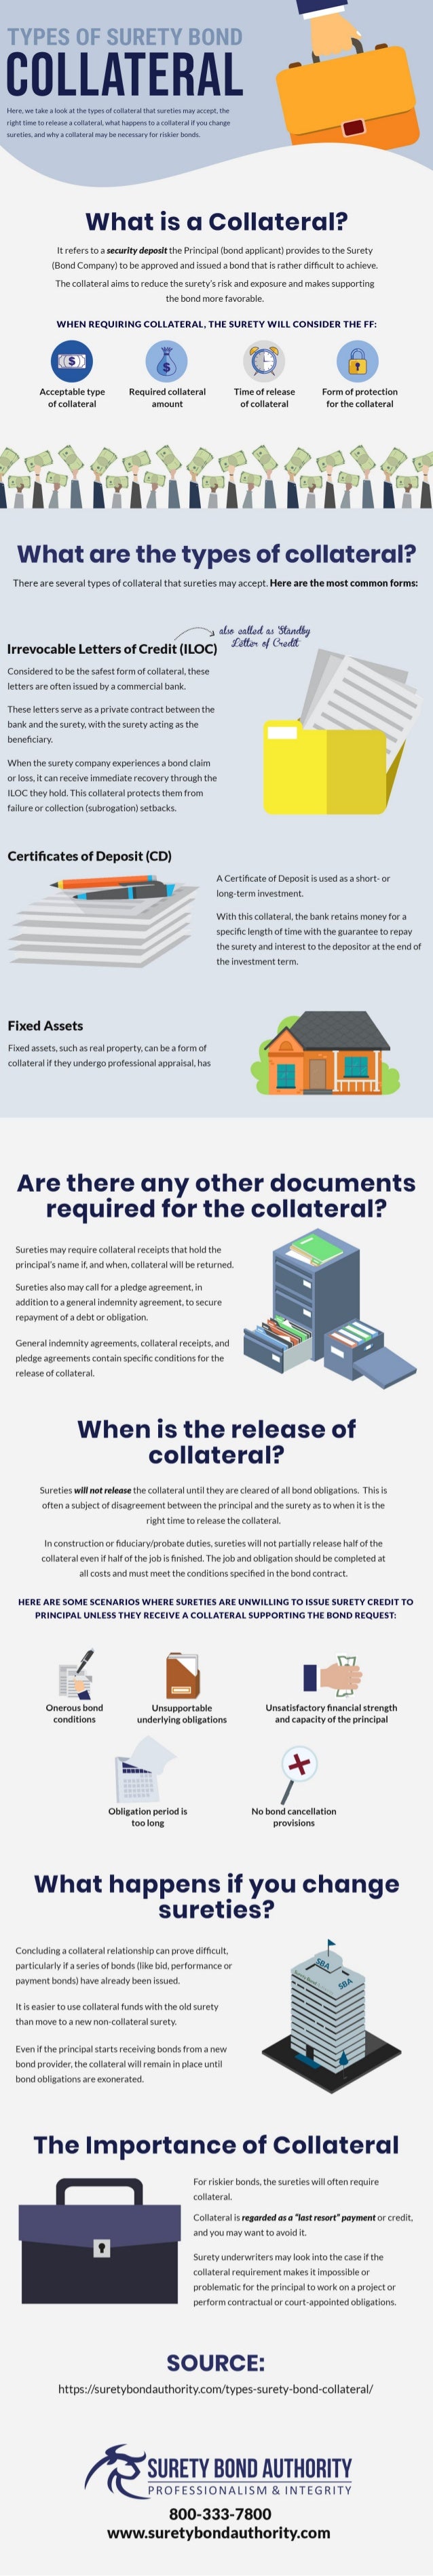 The Different Types of Surety Bond Collateral